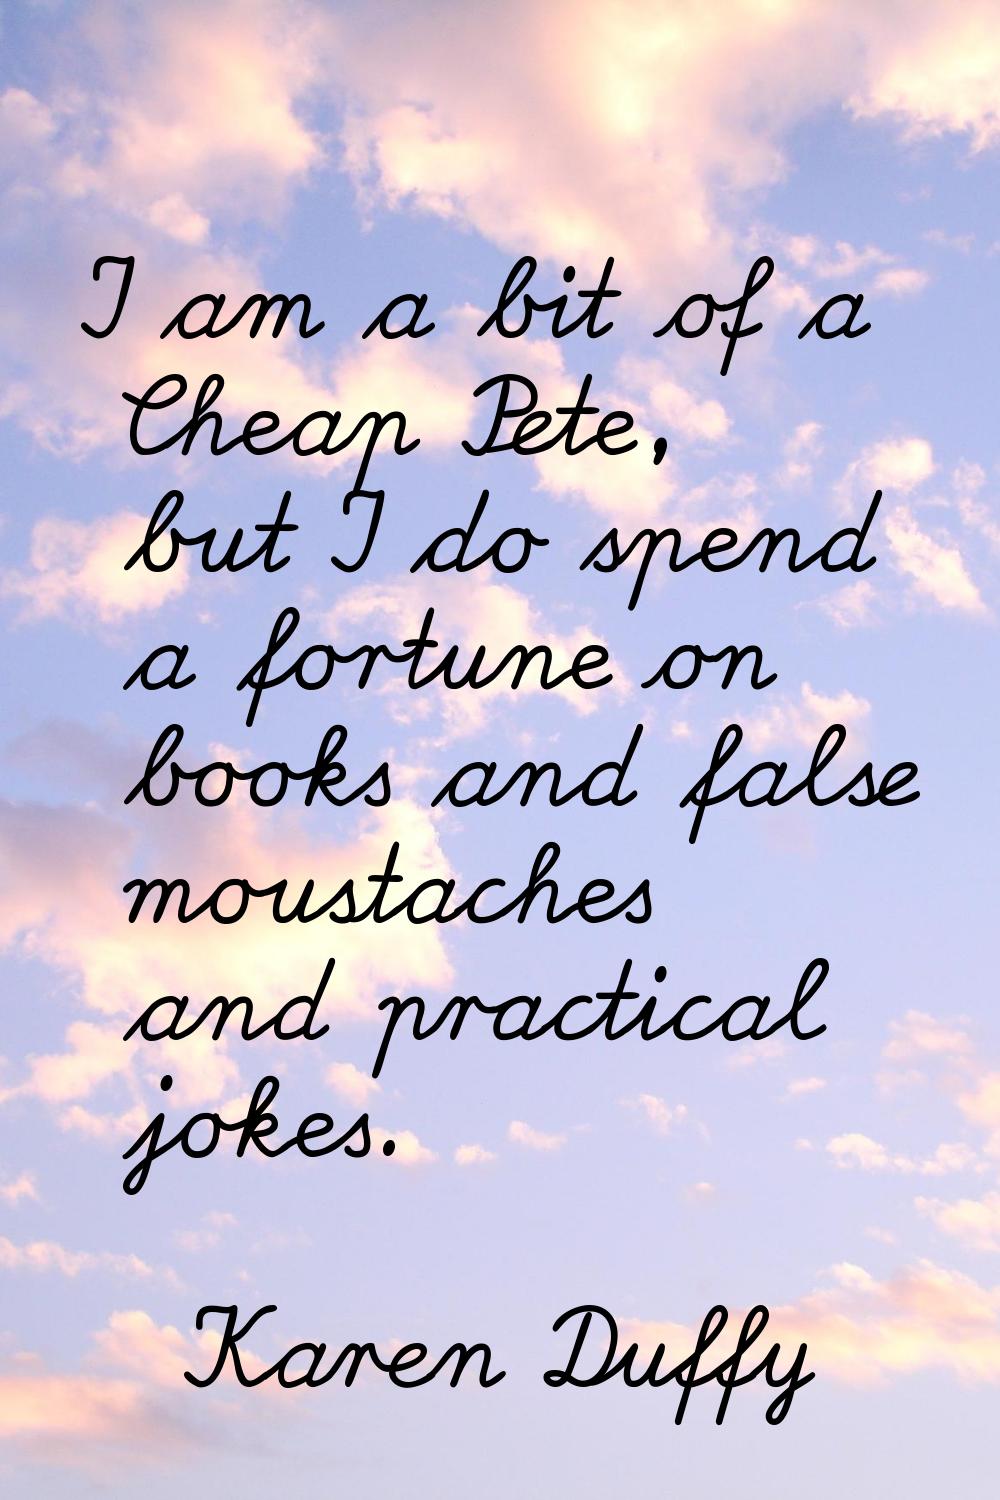 I am a bit of a Cheap Pete, but I do spend a fortune on books and false moustaches and practical jo